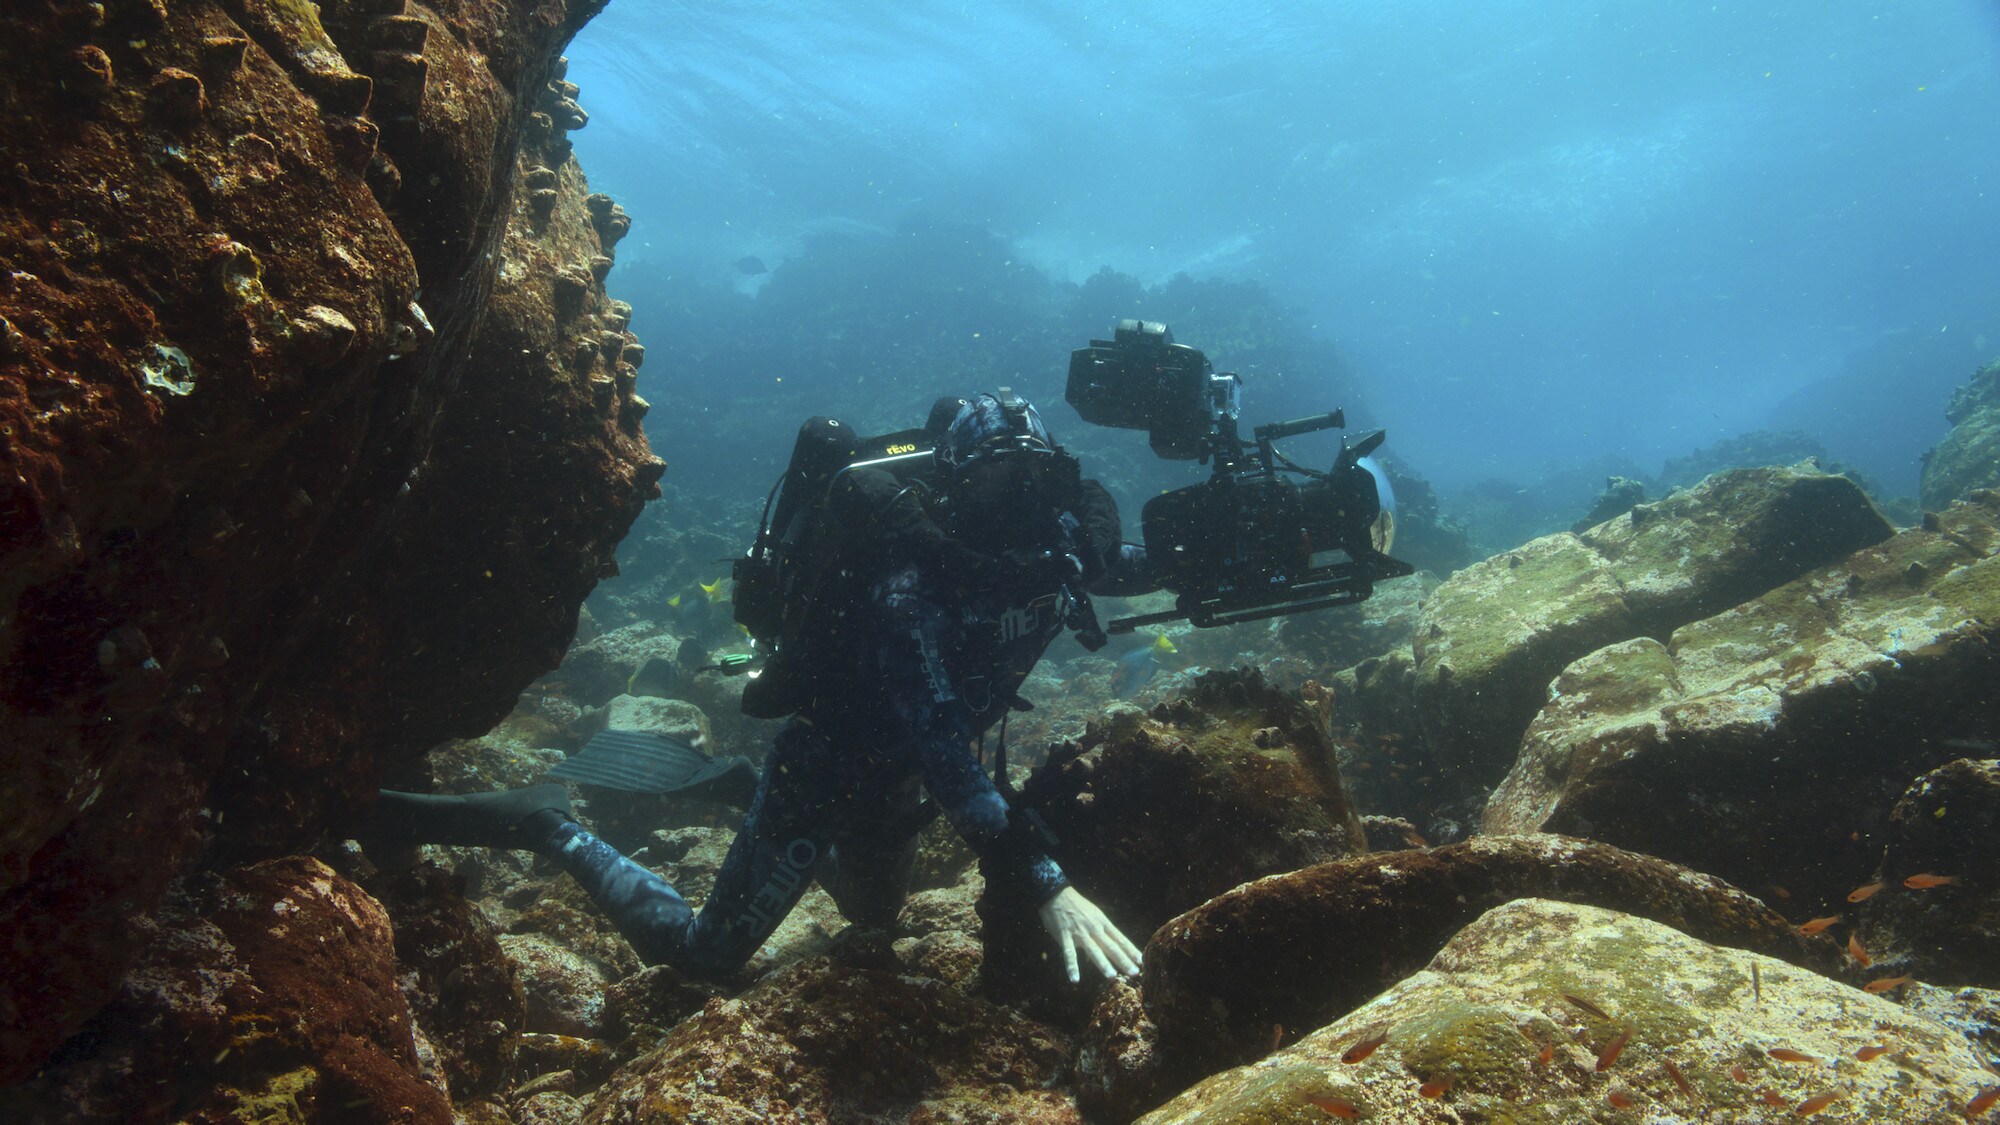 Underwater shot of Bertie Gregory amongst the rocks. (National Geographic for Disney+/Jeff Hester)